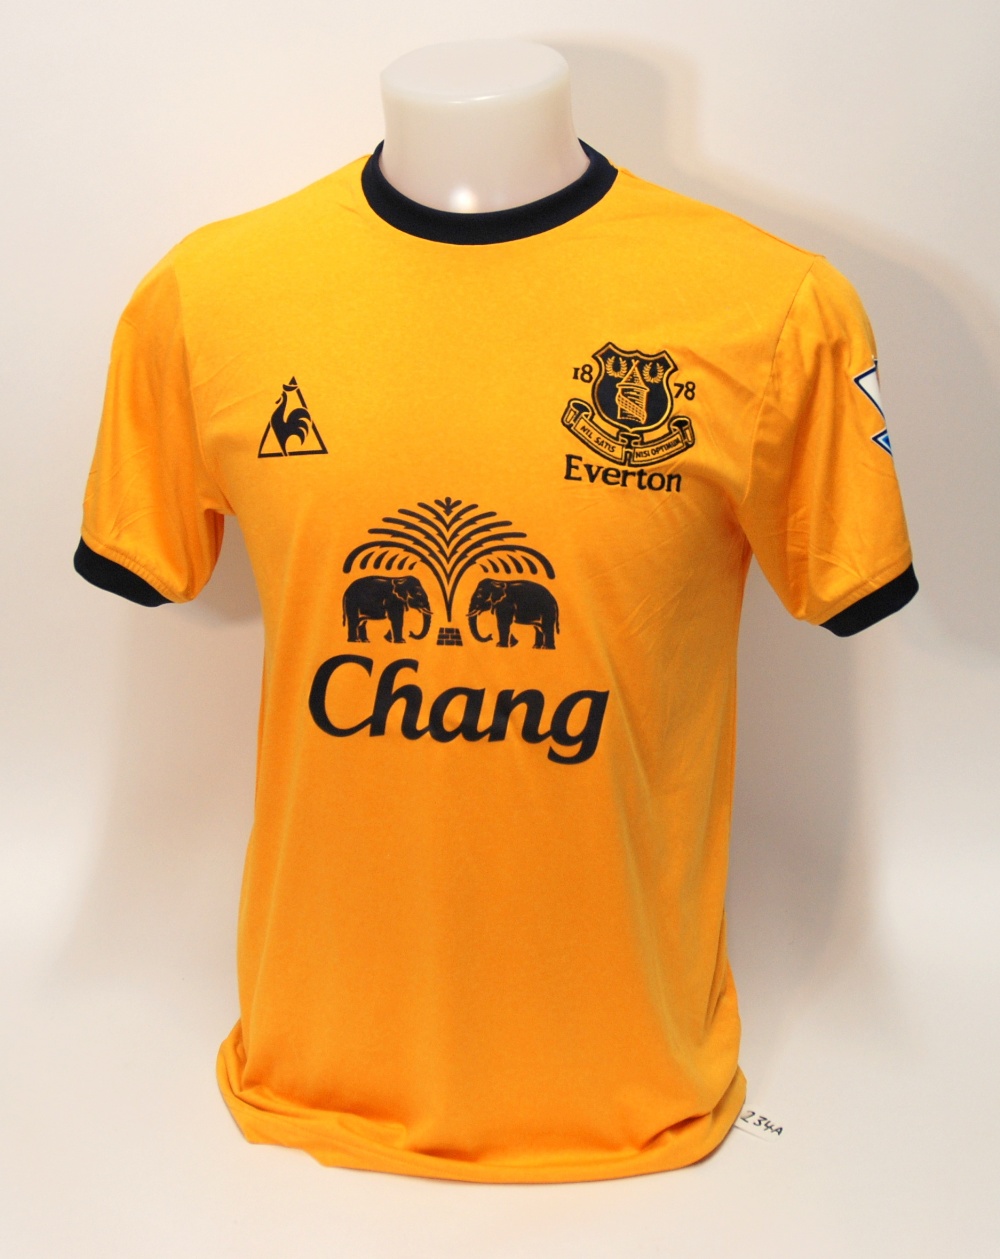 A yellow Everton short-sleeved shirt No.17, with crew-neck collar and embroidered badge, inscribed